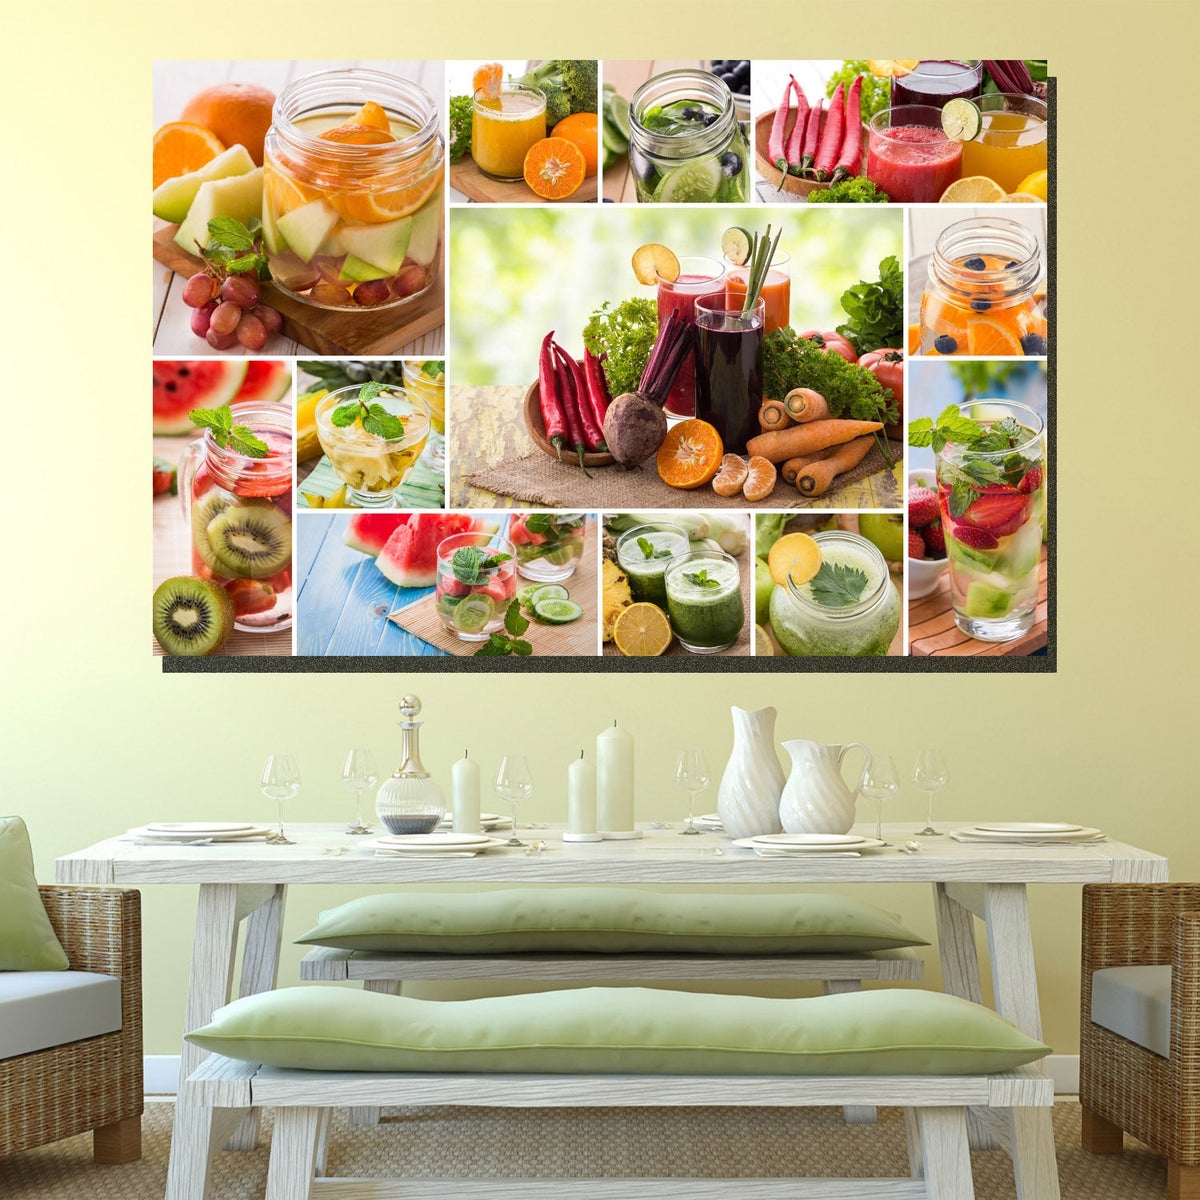 https://cdn.shopify.com/s/files/1/0387/9986/8044/products/InfusedWaterCollageCanvasArtprintStretched-2.jpg